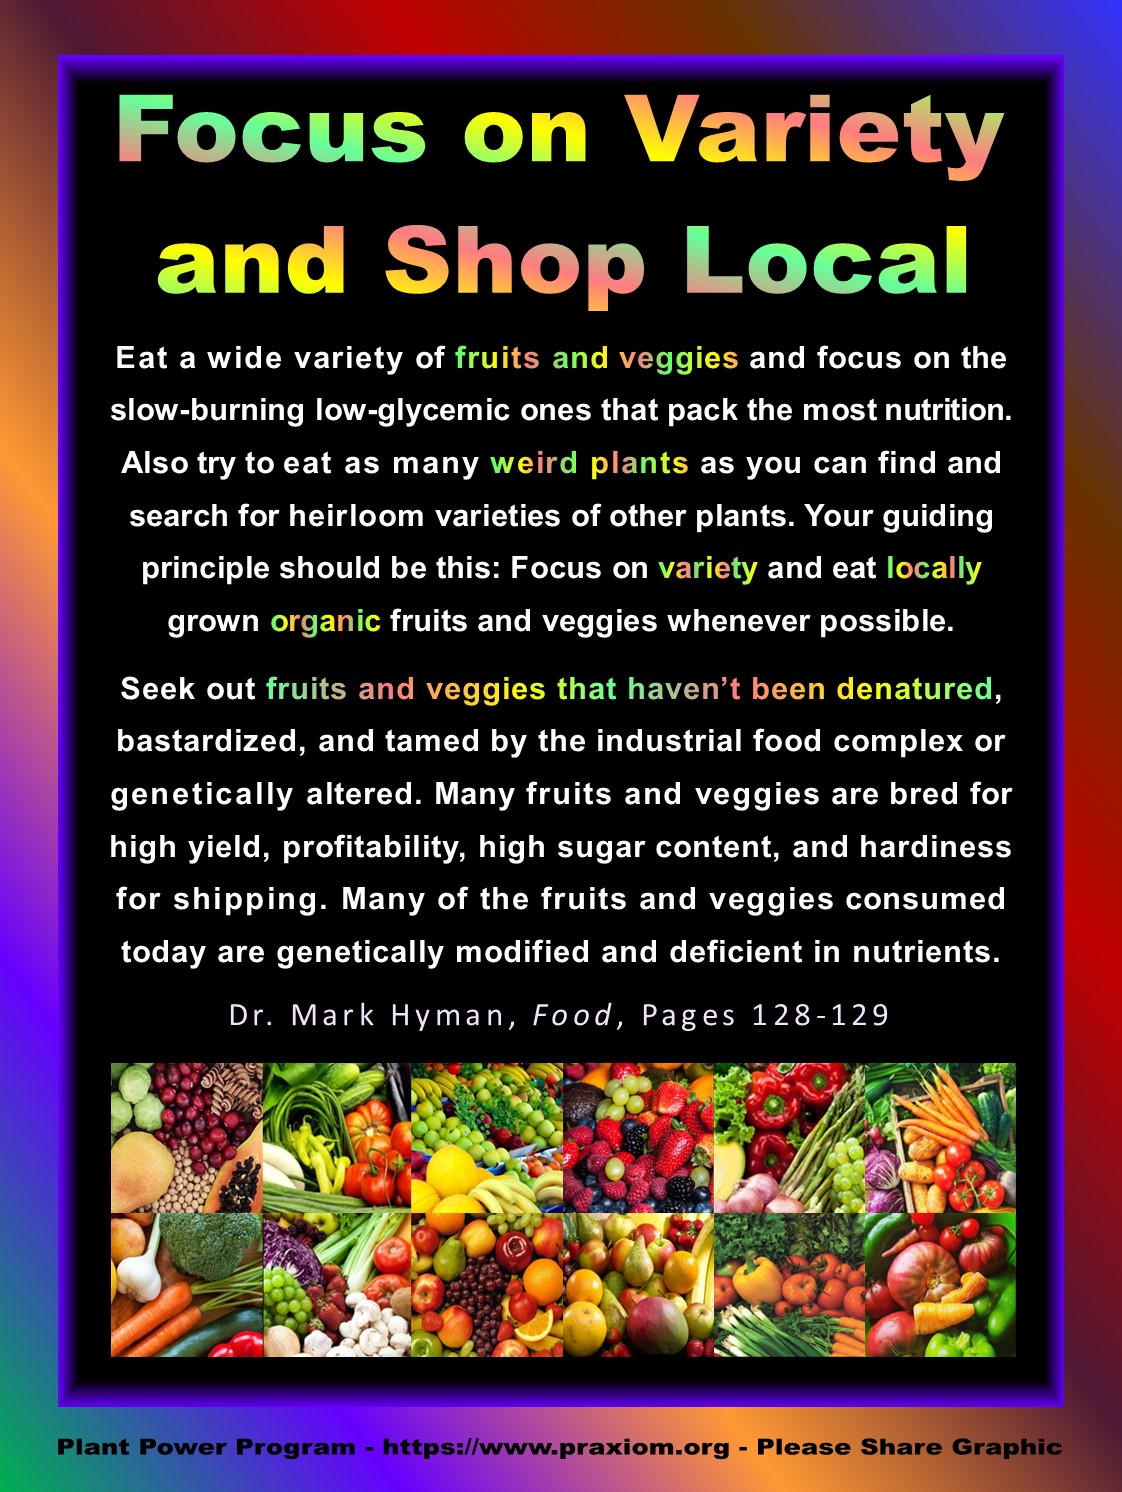 Focus on Variety and Shop Local - Dr. Mark Hyman